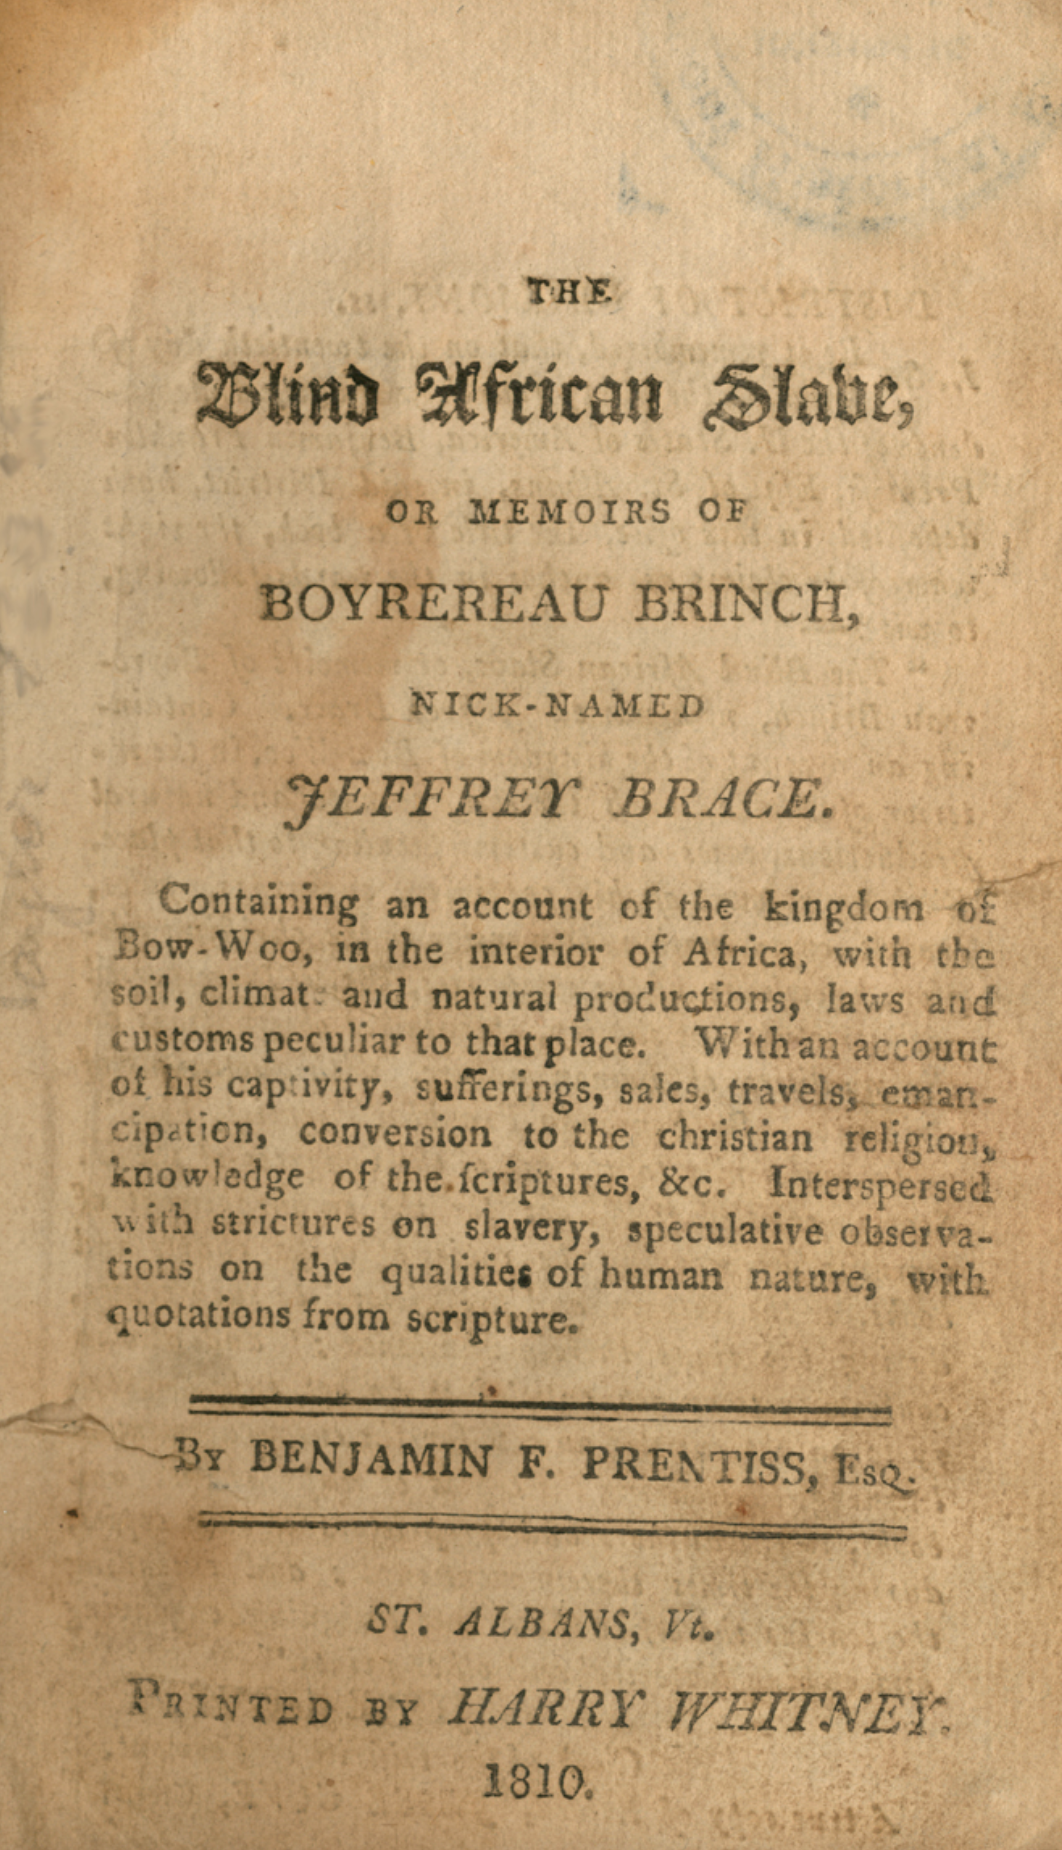 This is the title page of the original 1810 edition of the memoirs of Jeffrey Brace from the collections of the Vermont Historical Society.